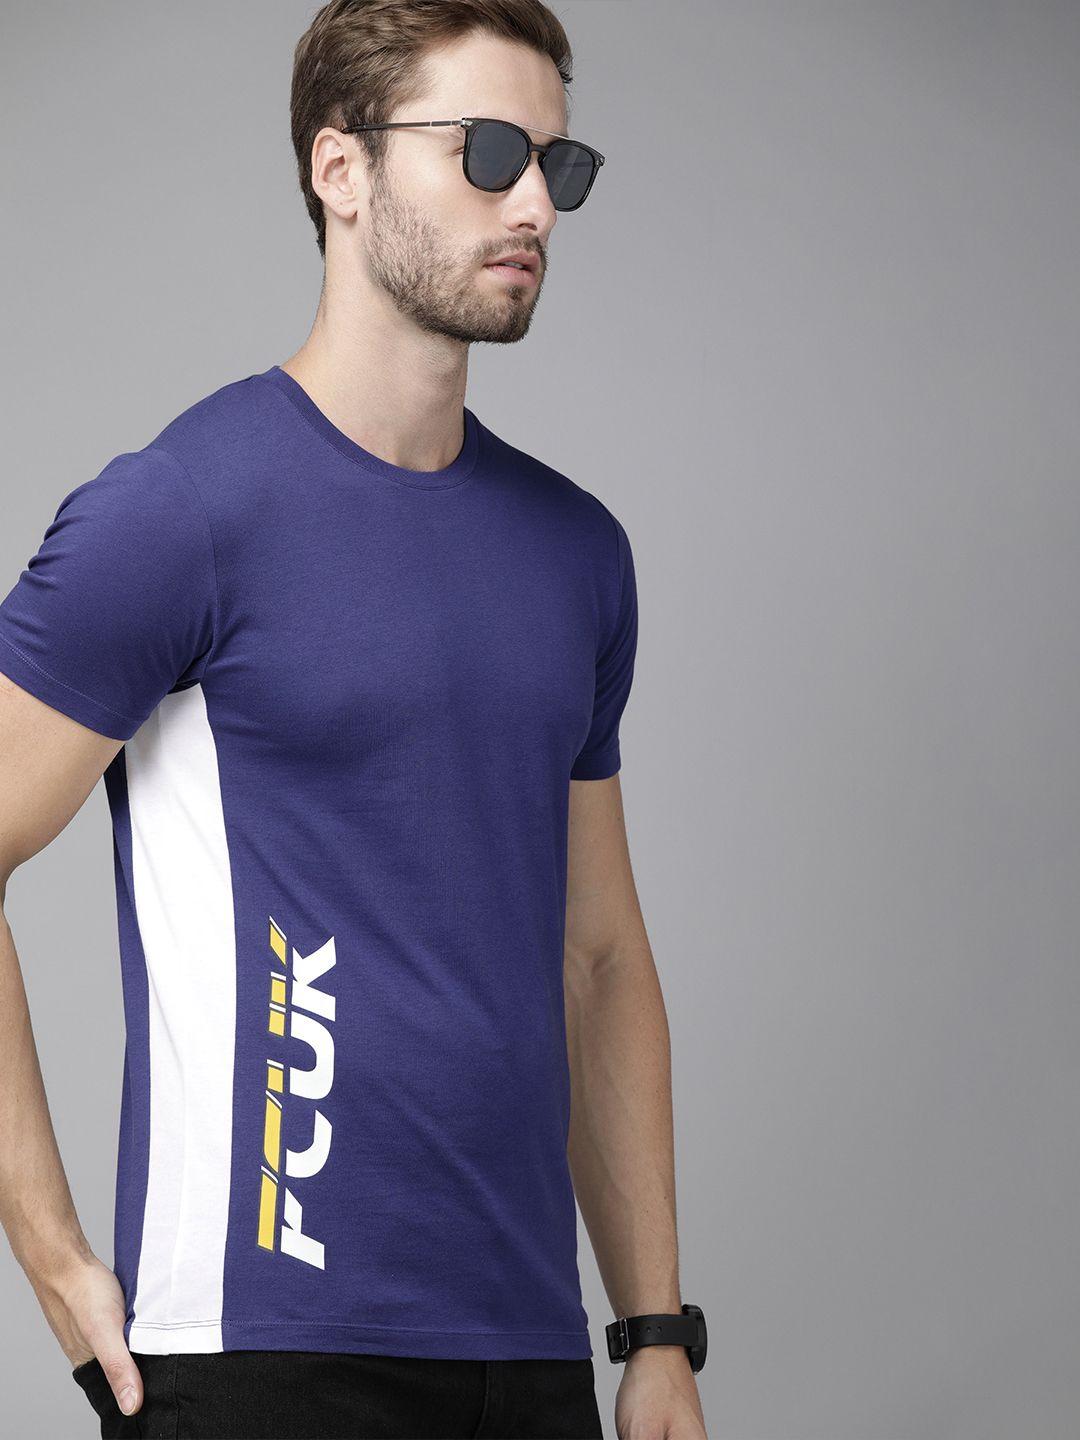 french connection men blue brand logo printed slim fit t-shirt with side stripes